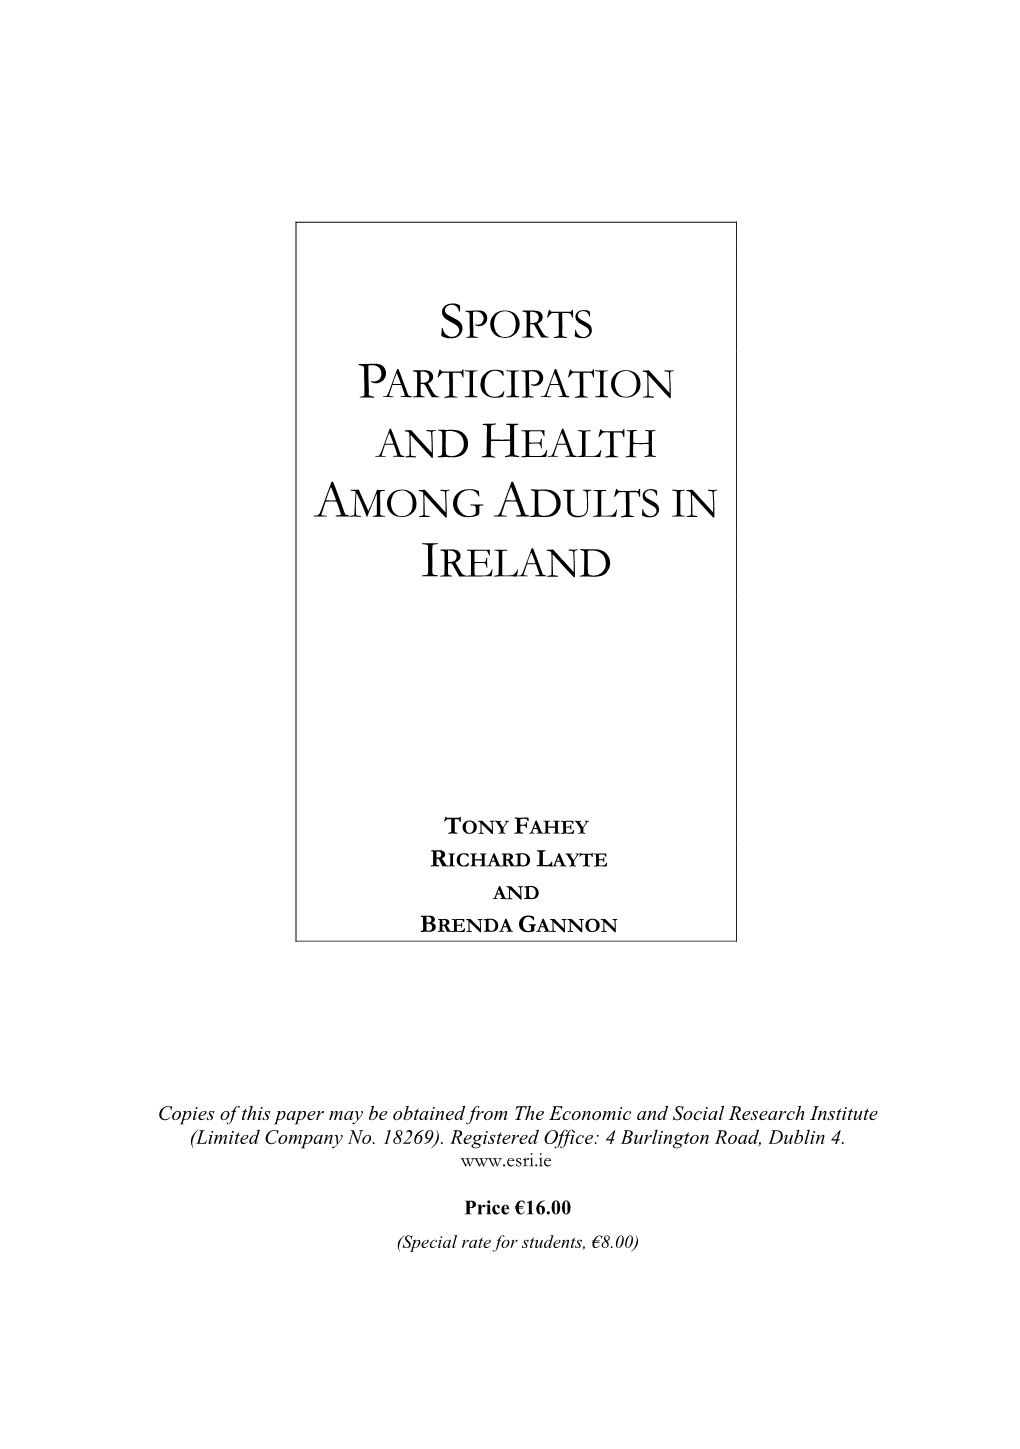 Sports Participation and Health Among Adults in Ireland